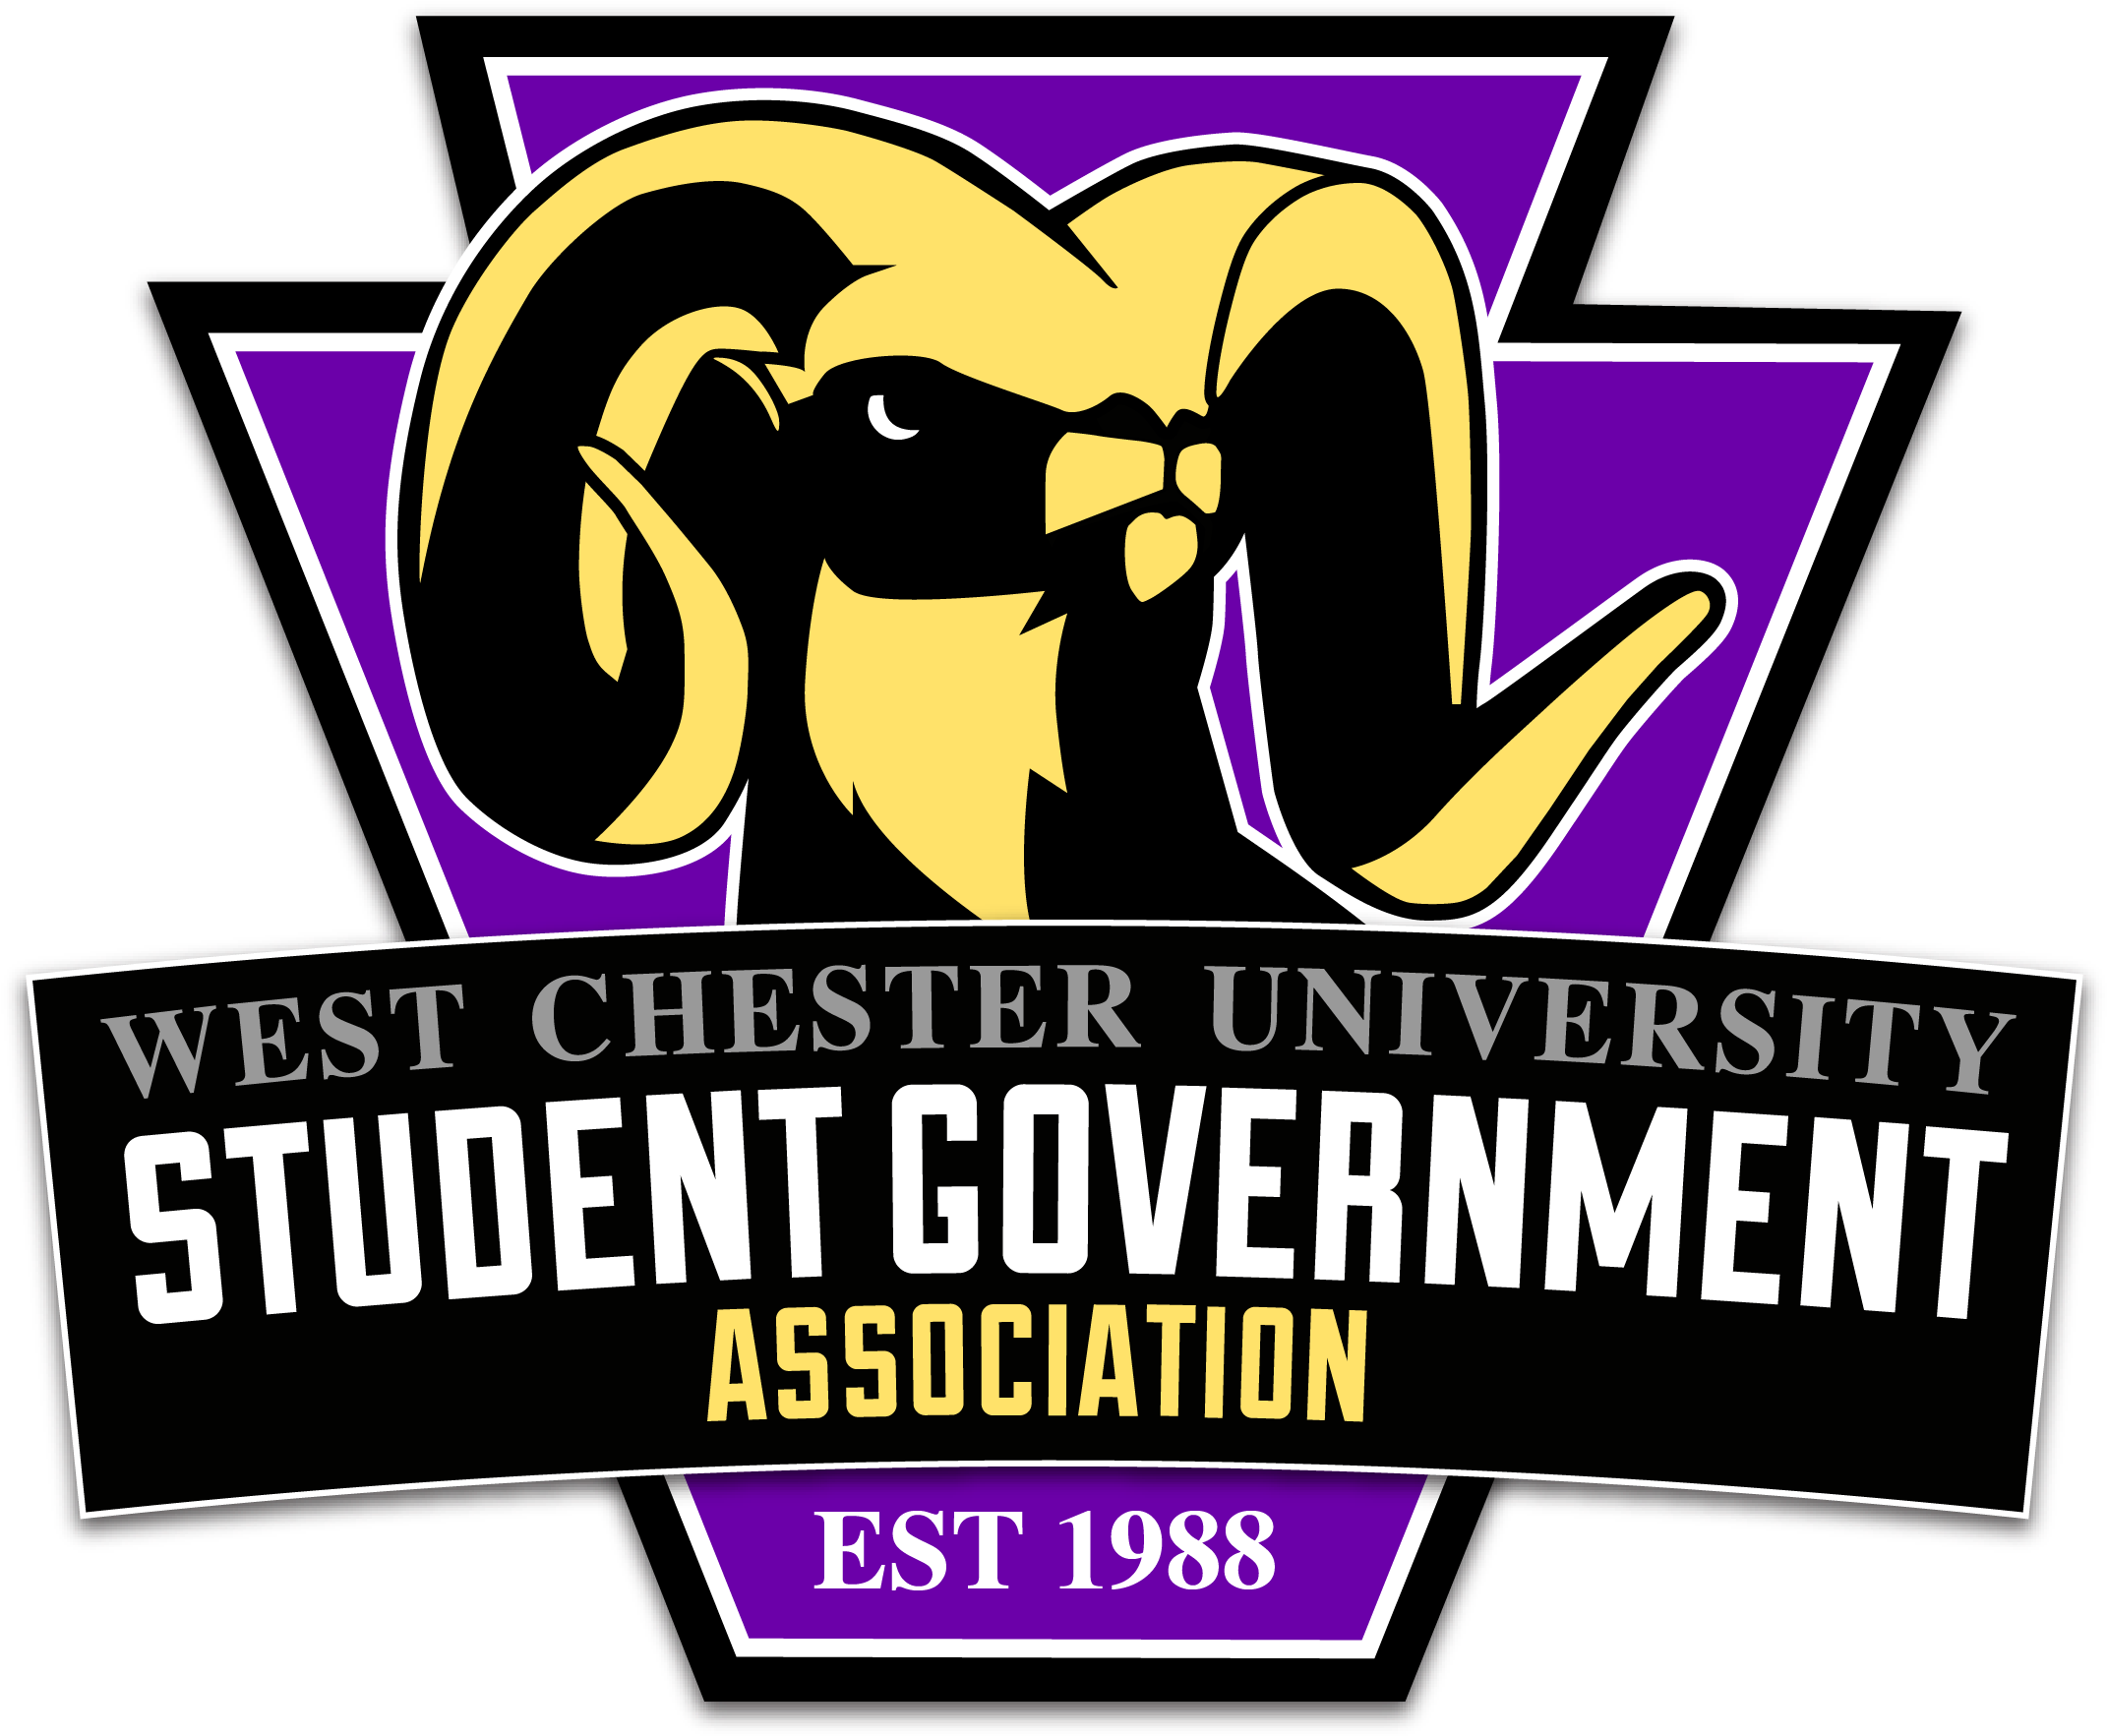 West Chester University Student Government Association - University Of Rizal System (2154x1775)